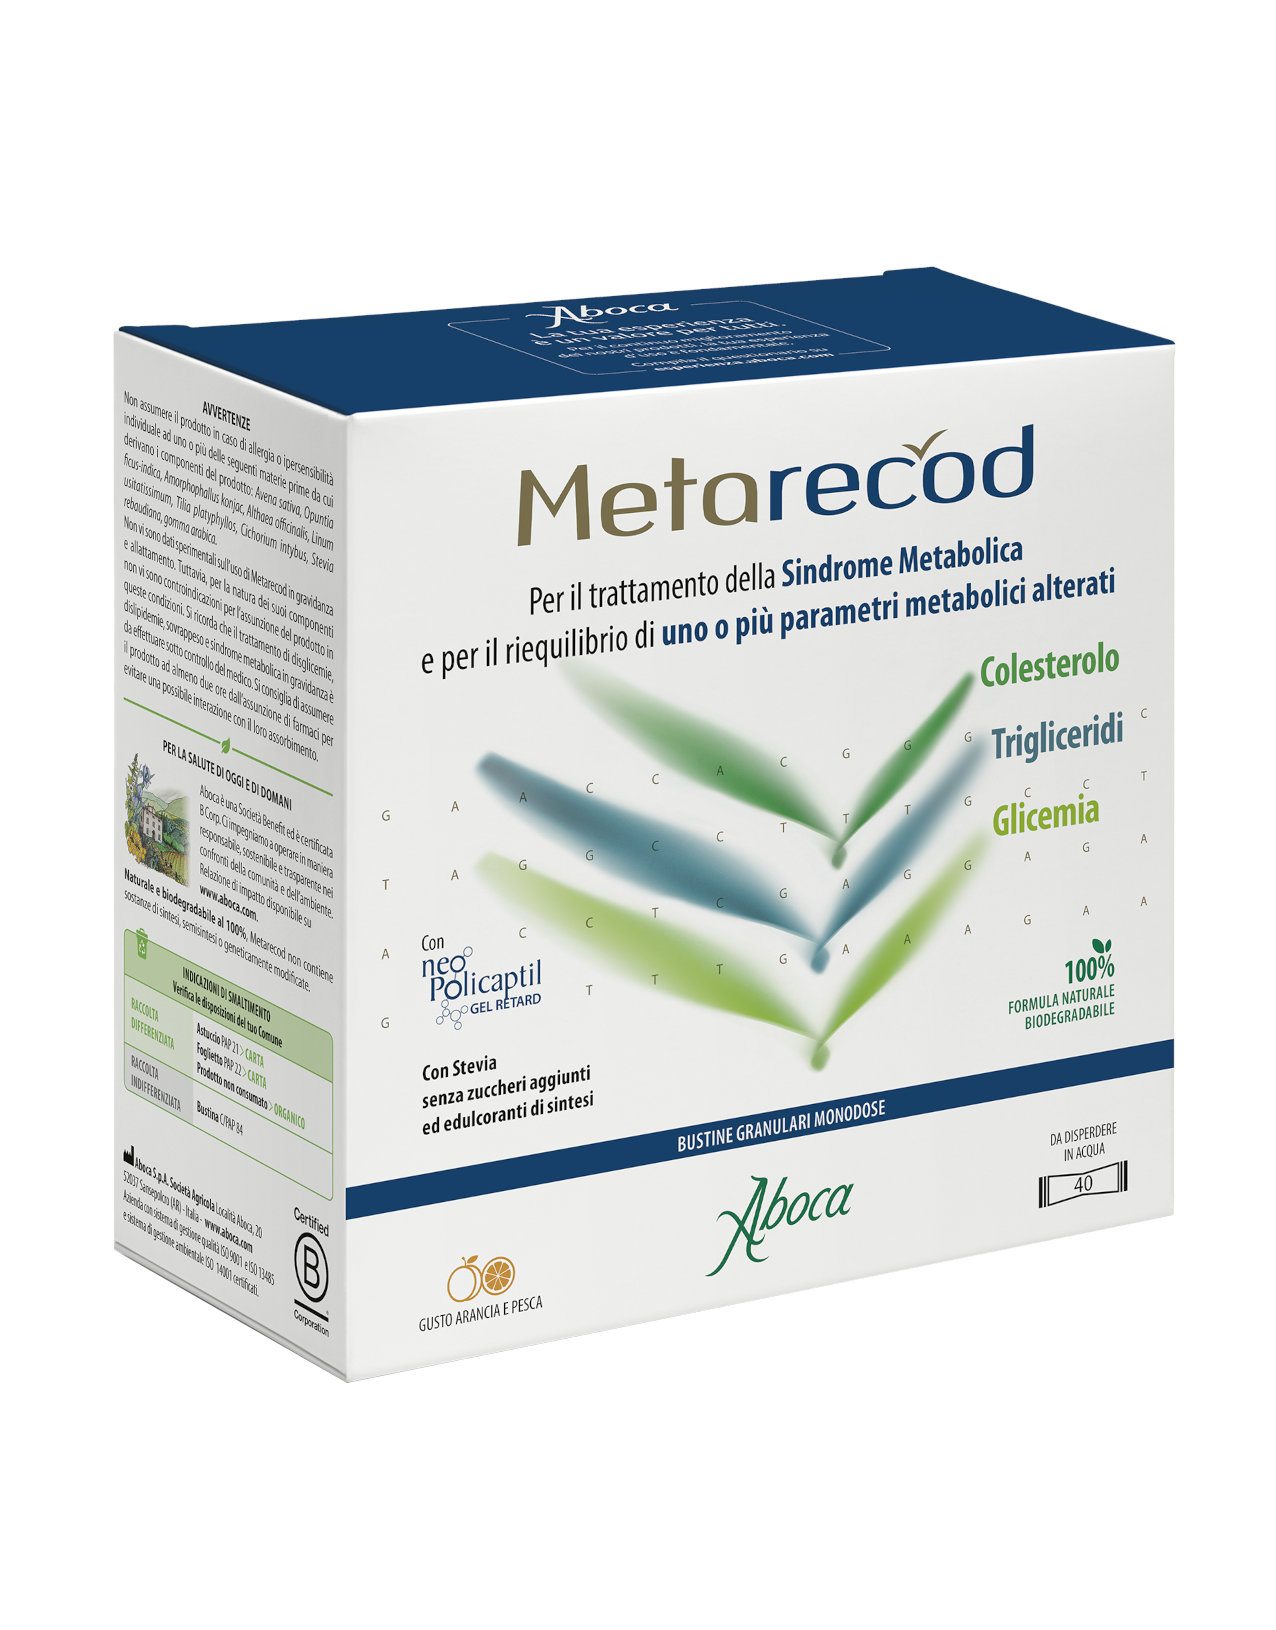 Metarecod by Aboca, 40 sachets x 2,5 g 